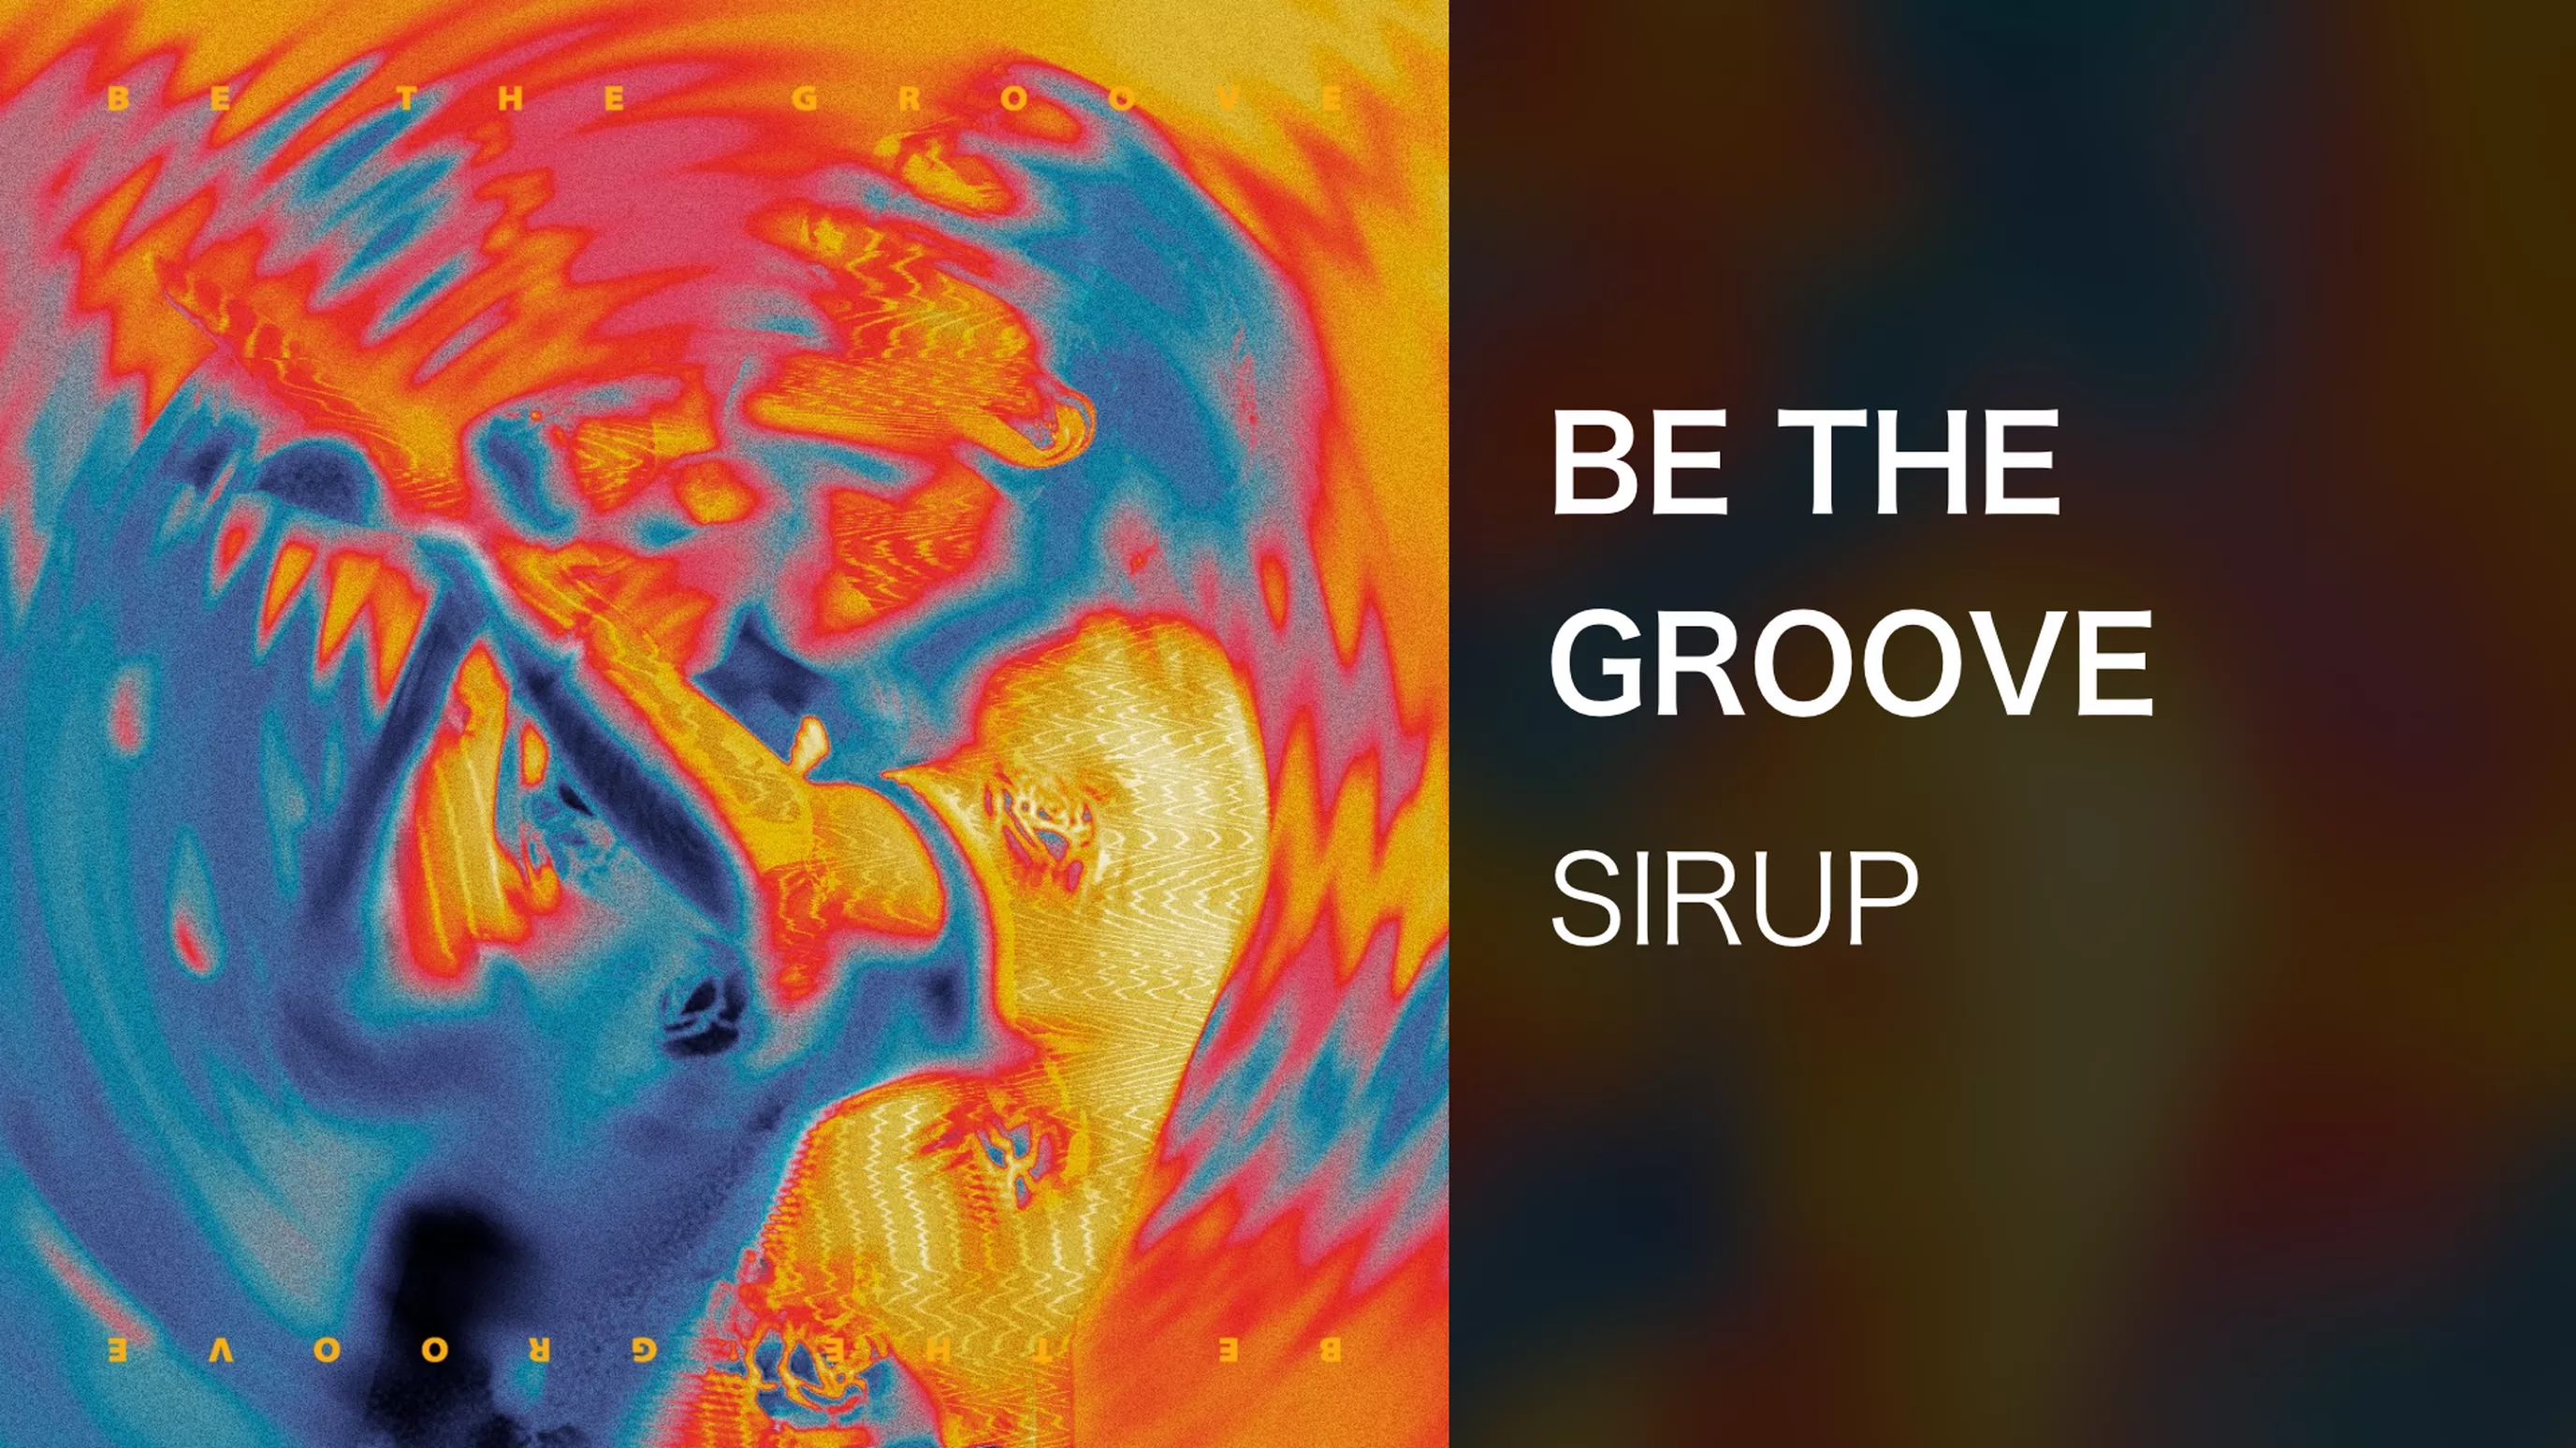 BE THE GROOVE